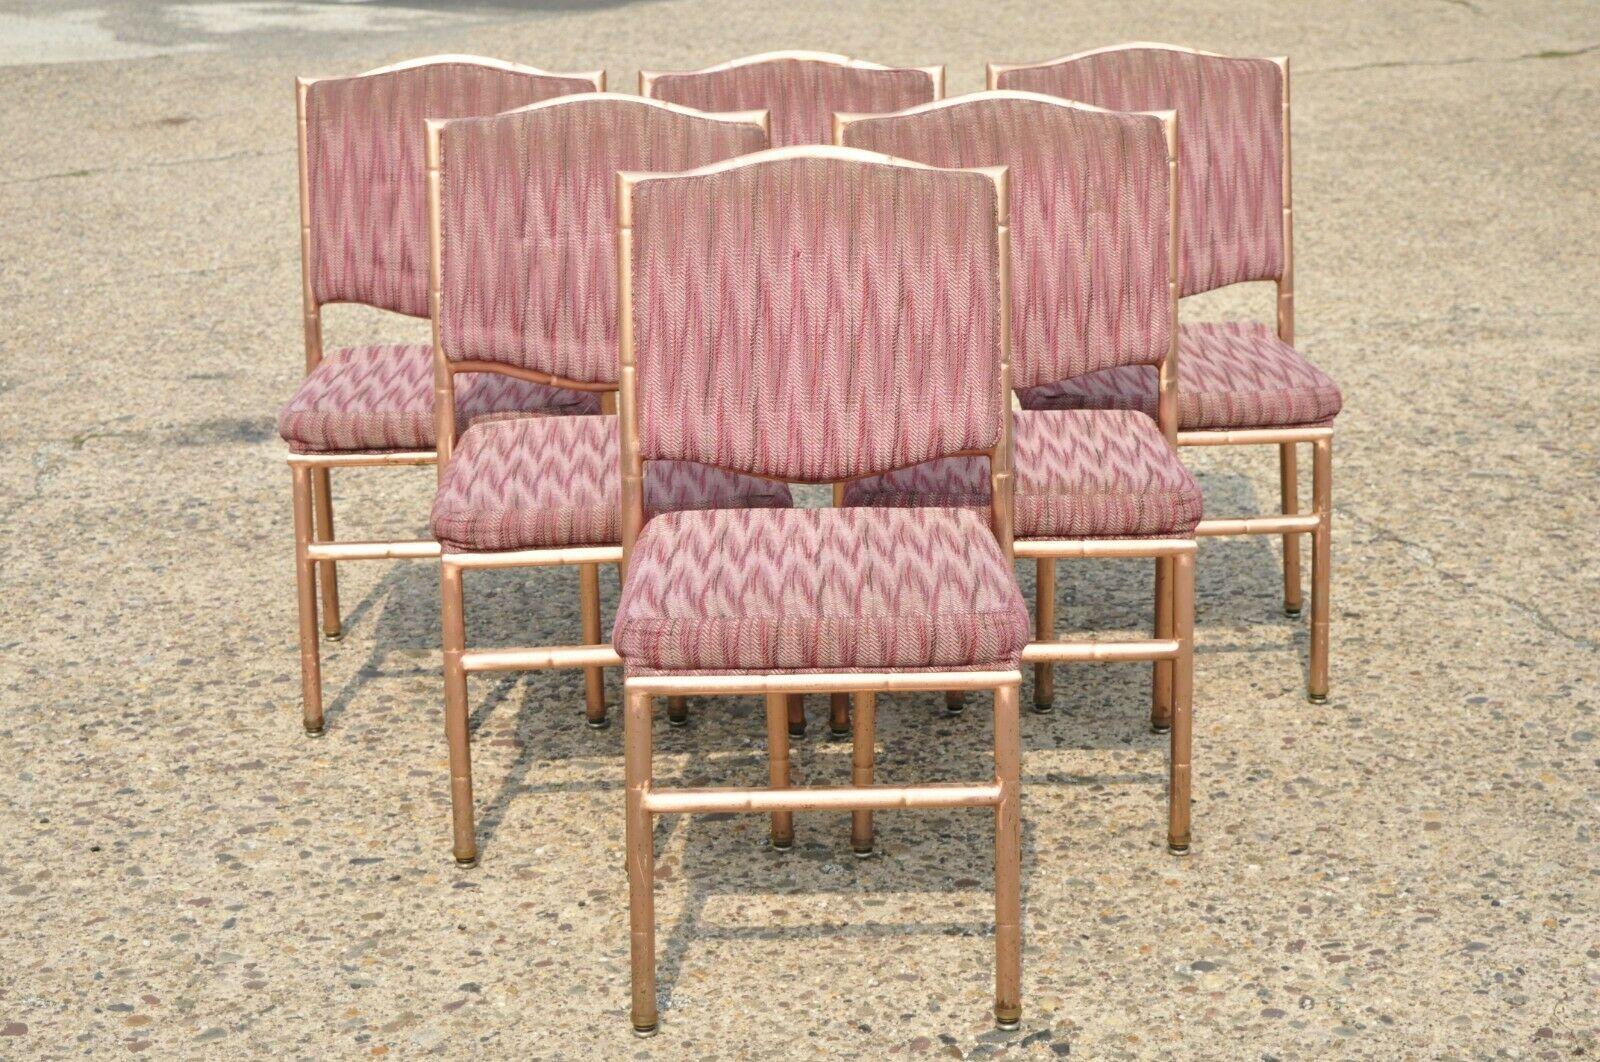 Vintage Shelby Williams Faux bamboo stacking pink / rose gold banquet dining chairs with removable upholstered backs - set of 6

***Listing is for (1) Set of (6) Chairs.*** 

Item features a steel metal frame, faux bamboo design, removable